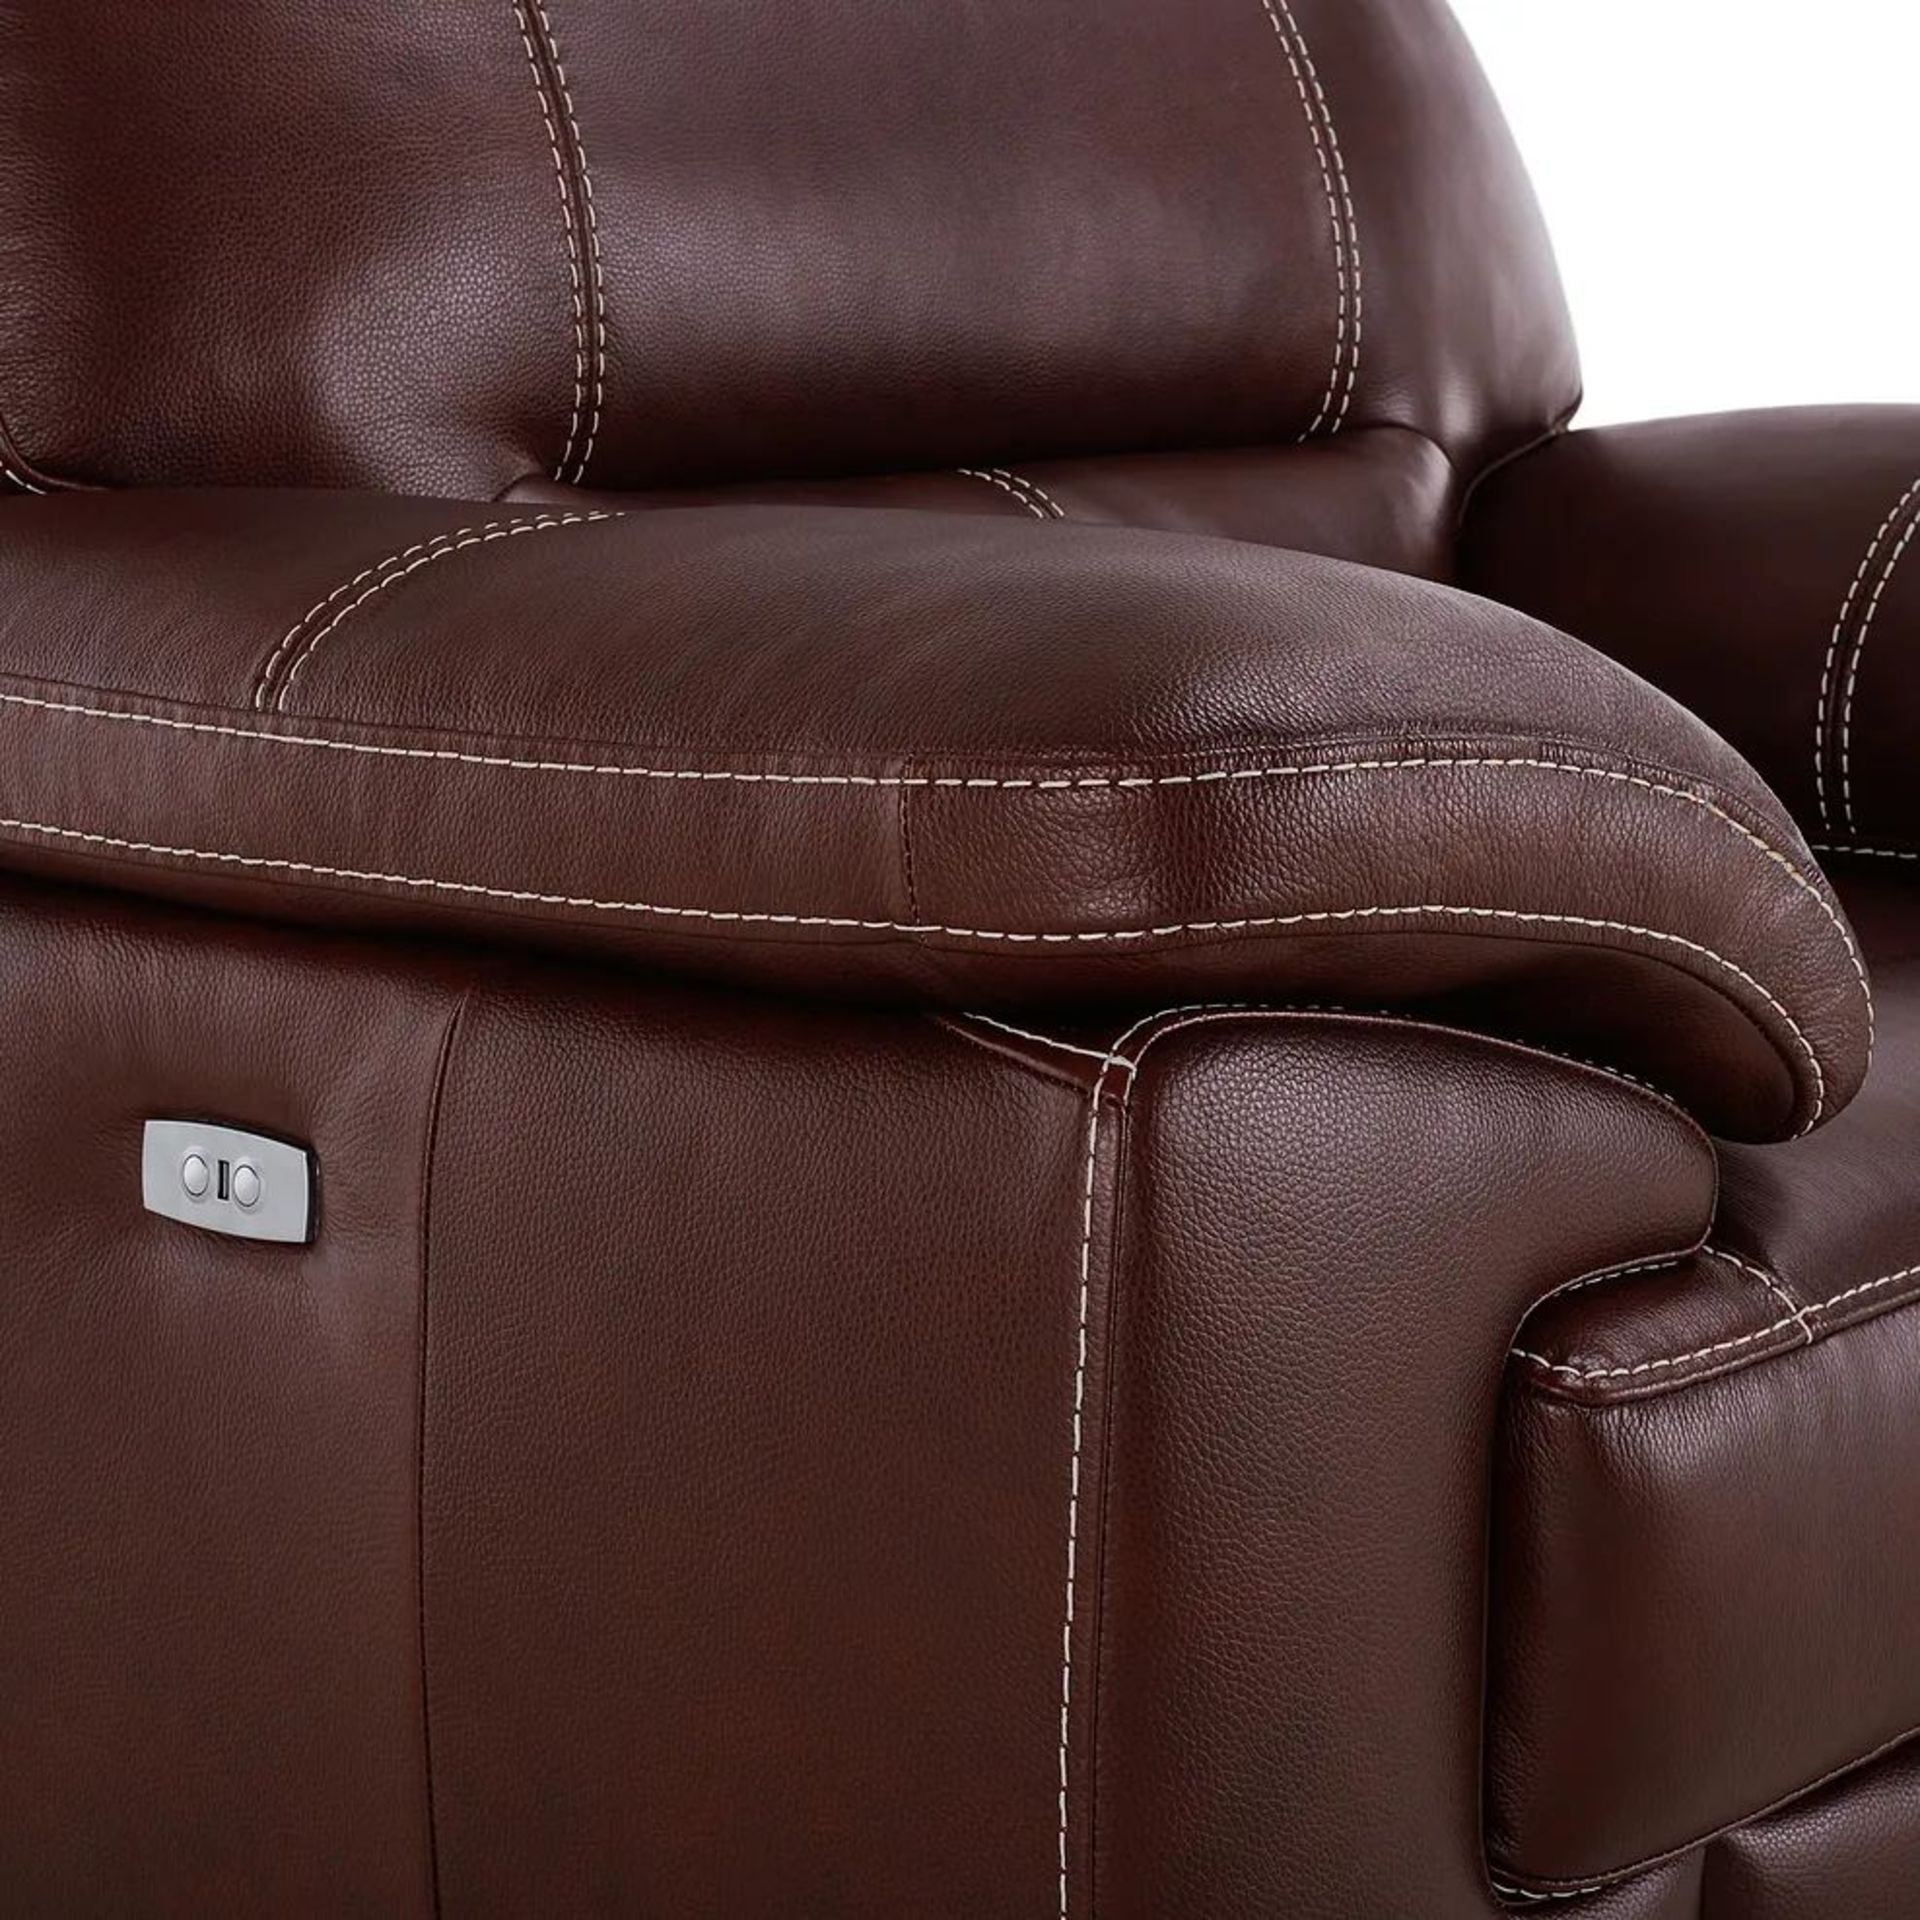 BRAND NEW ARLINGTON Electric Recliner Armchair - TAN LEATHER. RRP £1199. Create a traditional and - Image 12 of 12